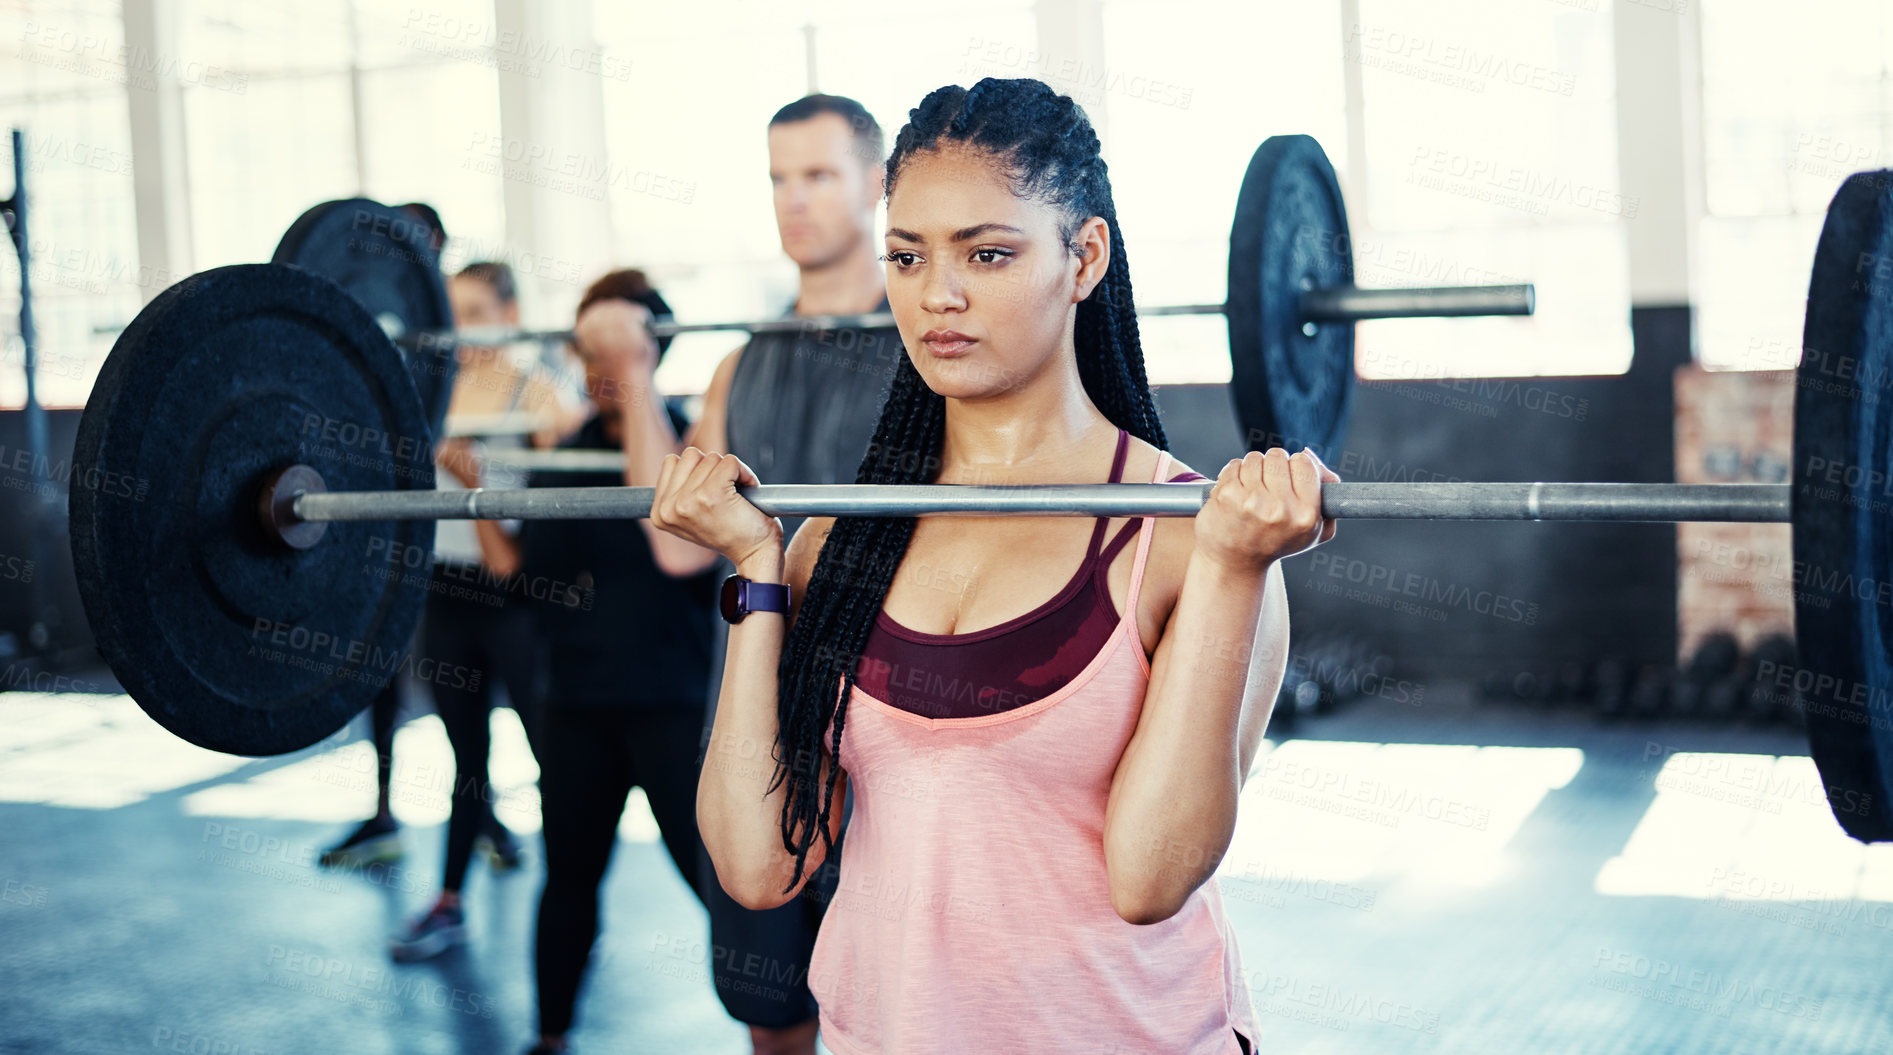 Buy stock photo Shot of a woman working out with a barbell in her session at the gym